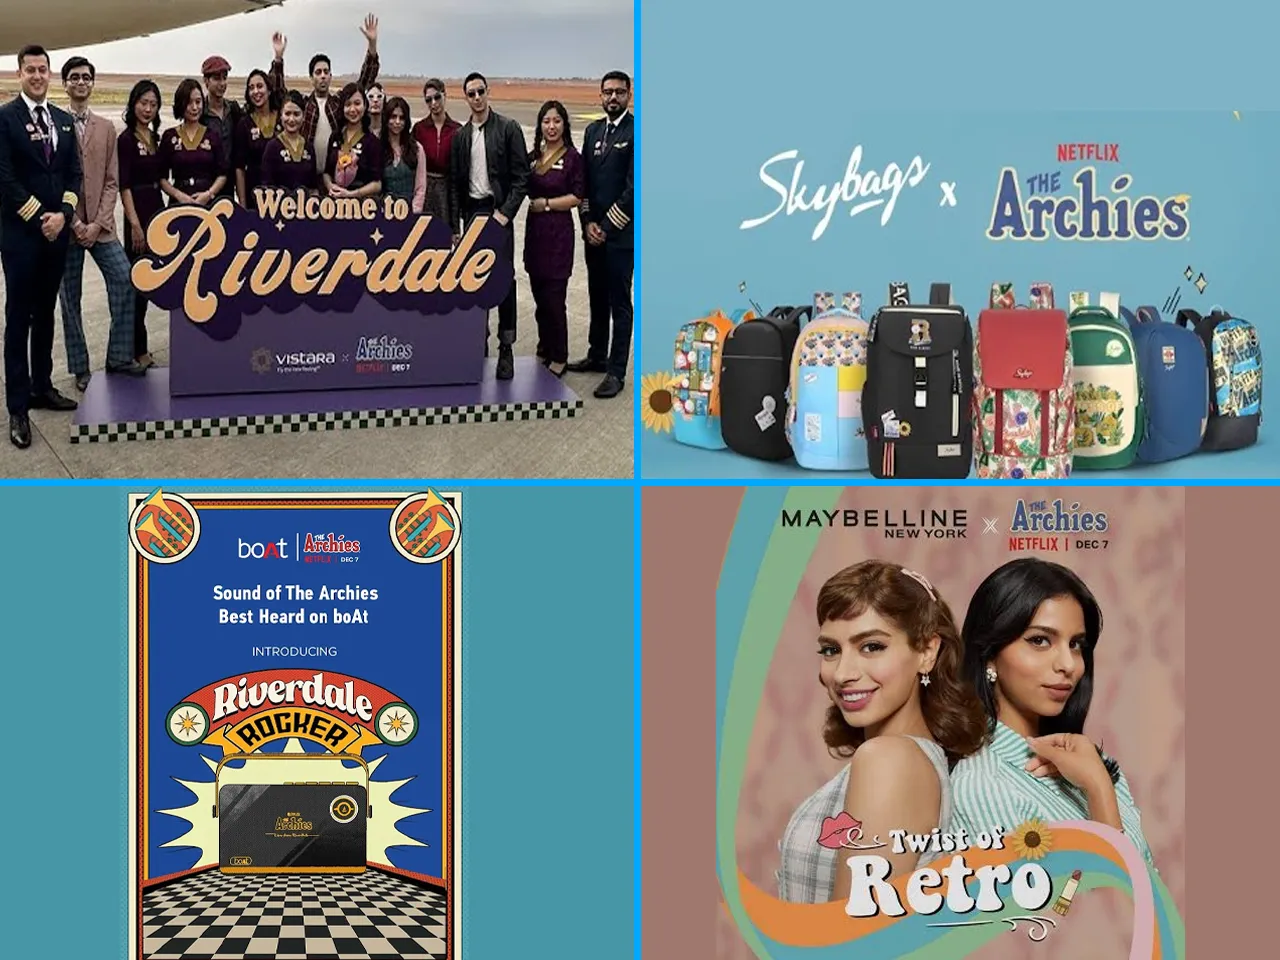 The Archies promotions bring a twist of retro in the world of marketing!